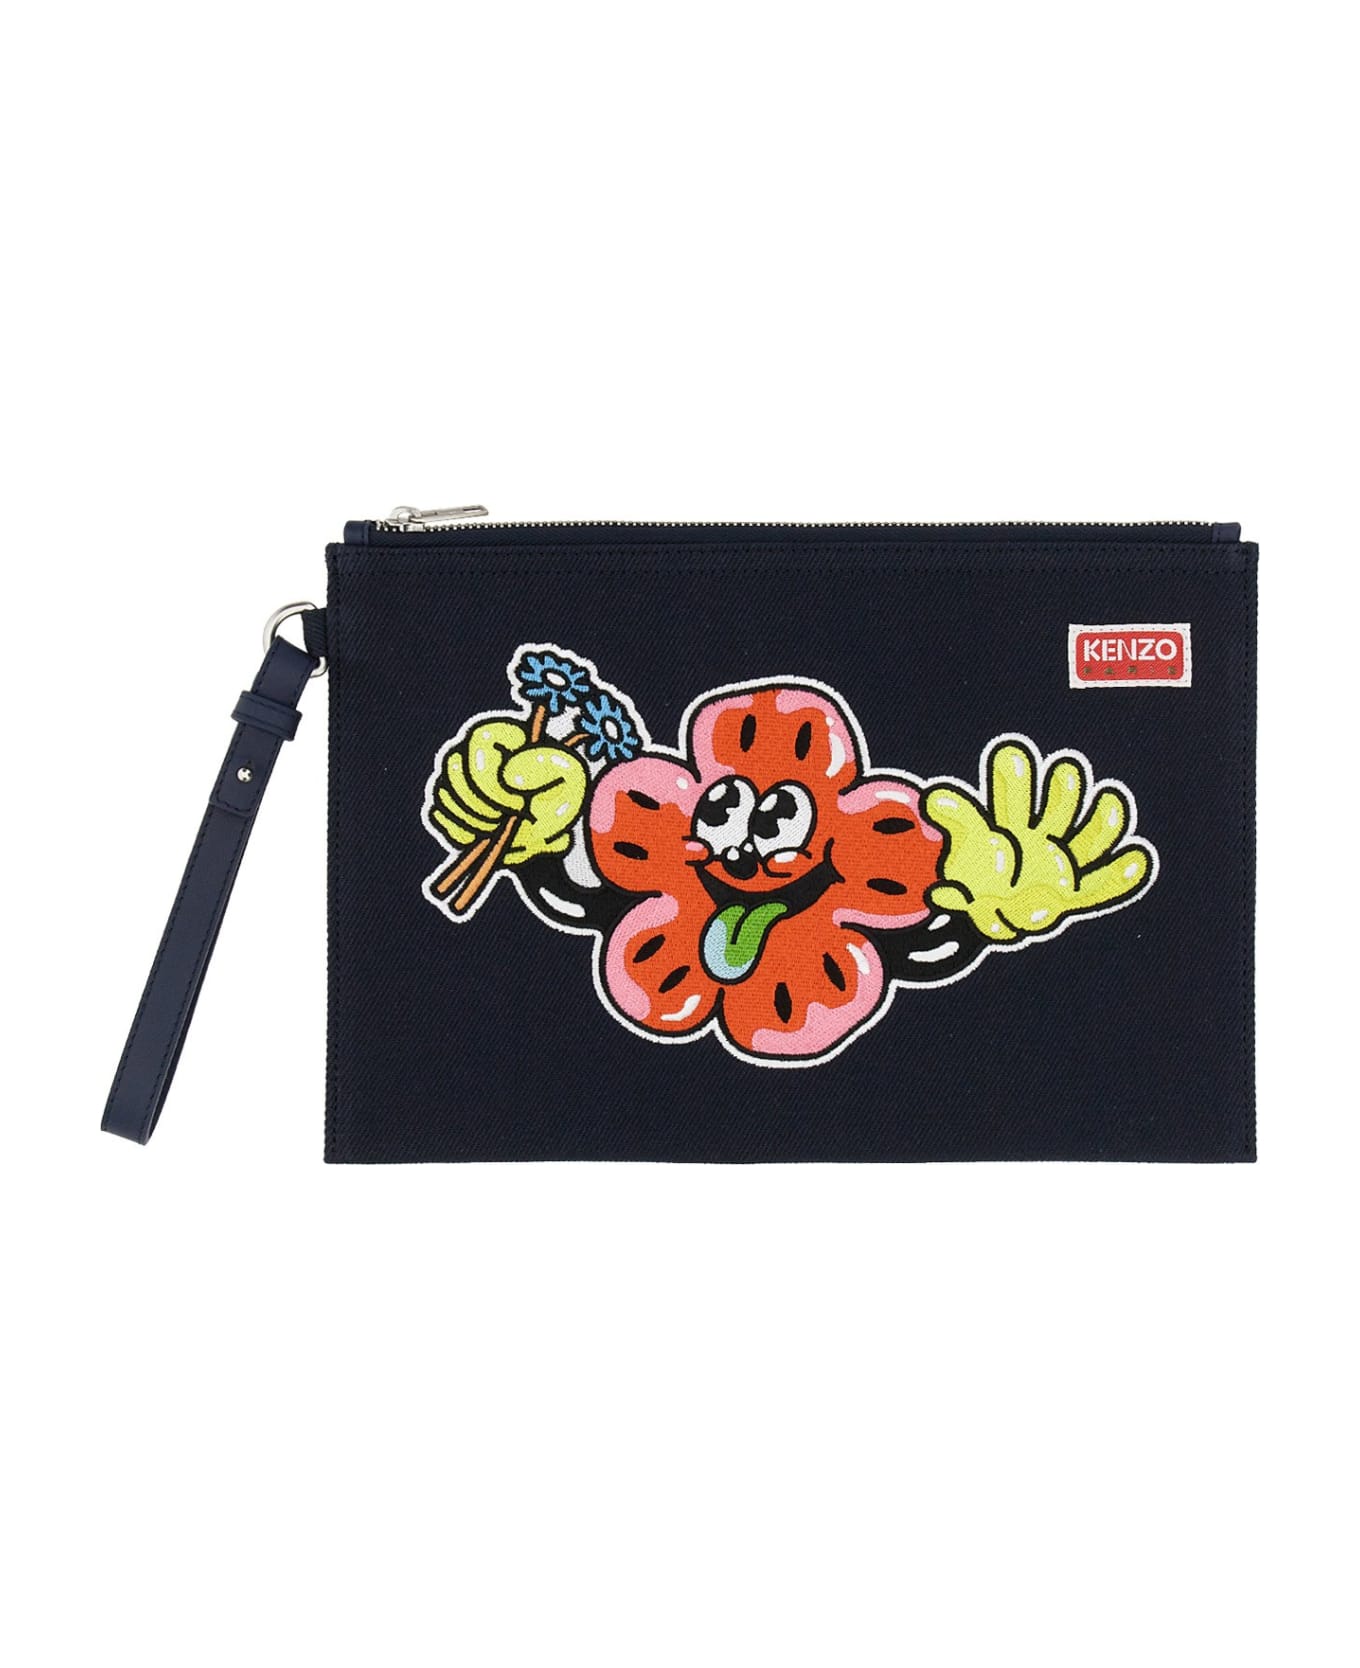 Kenzo Clutch With Embroidery - Bleu Marine トラベルバッグ